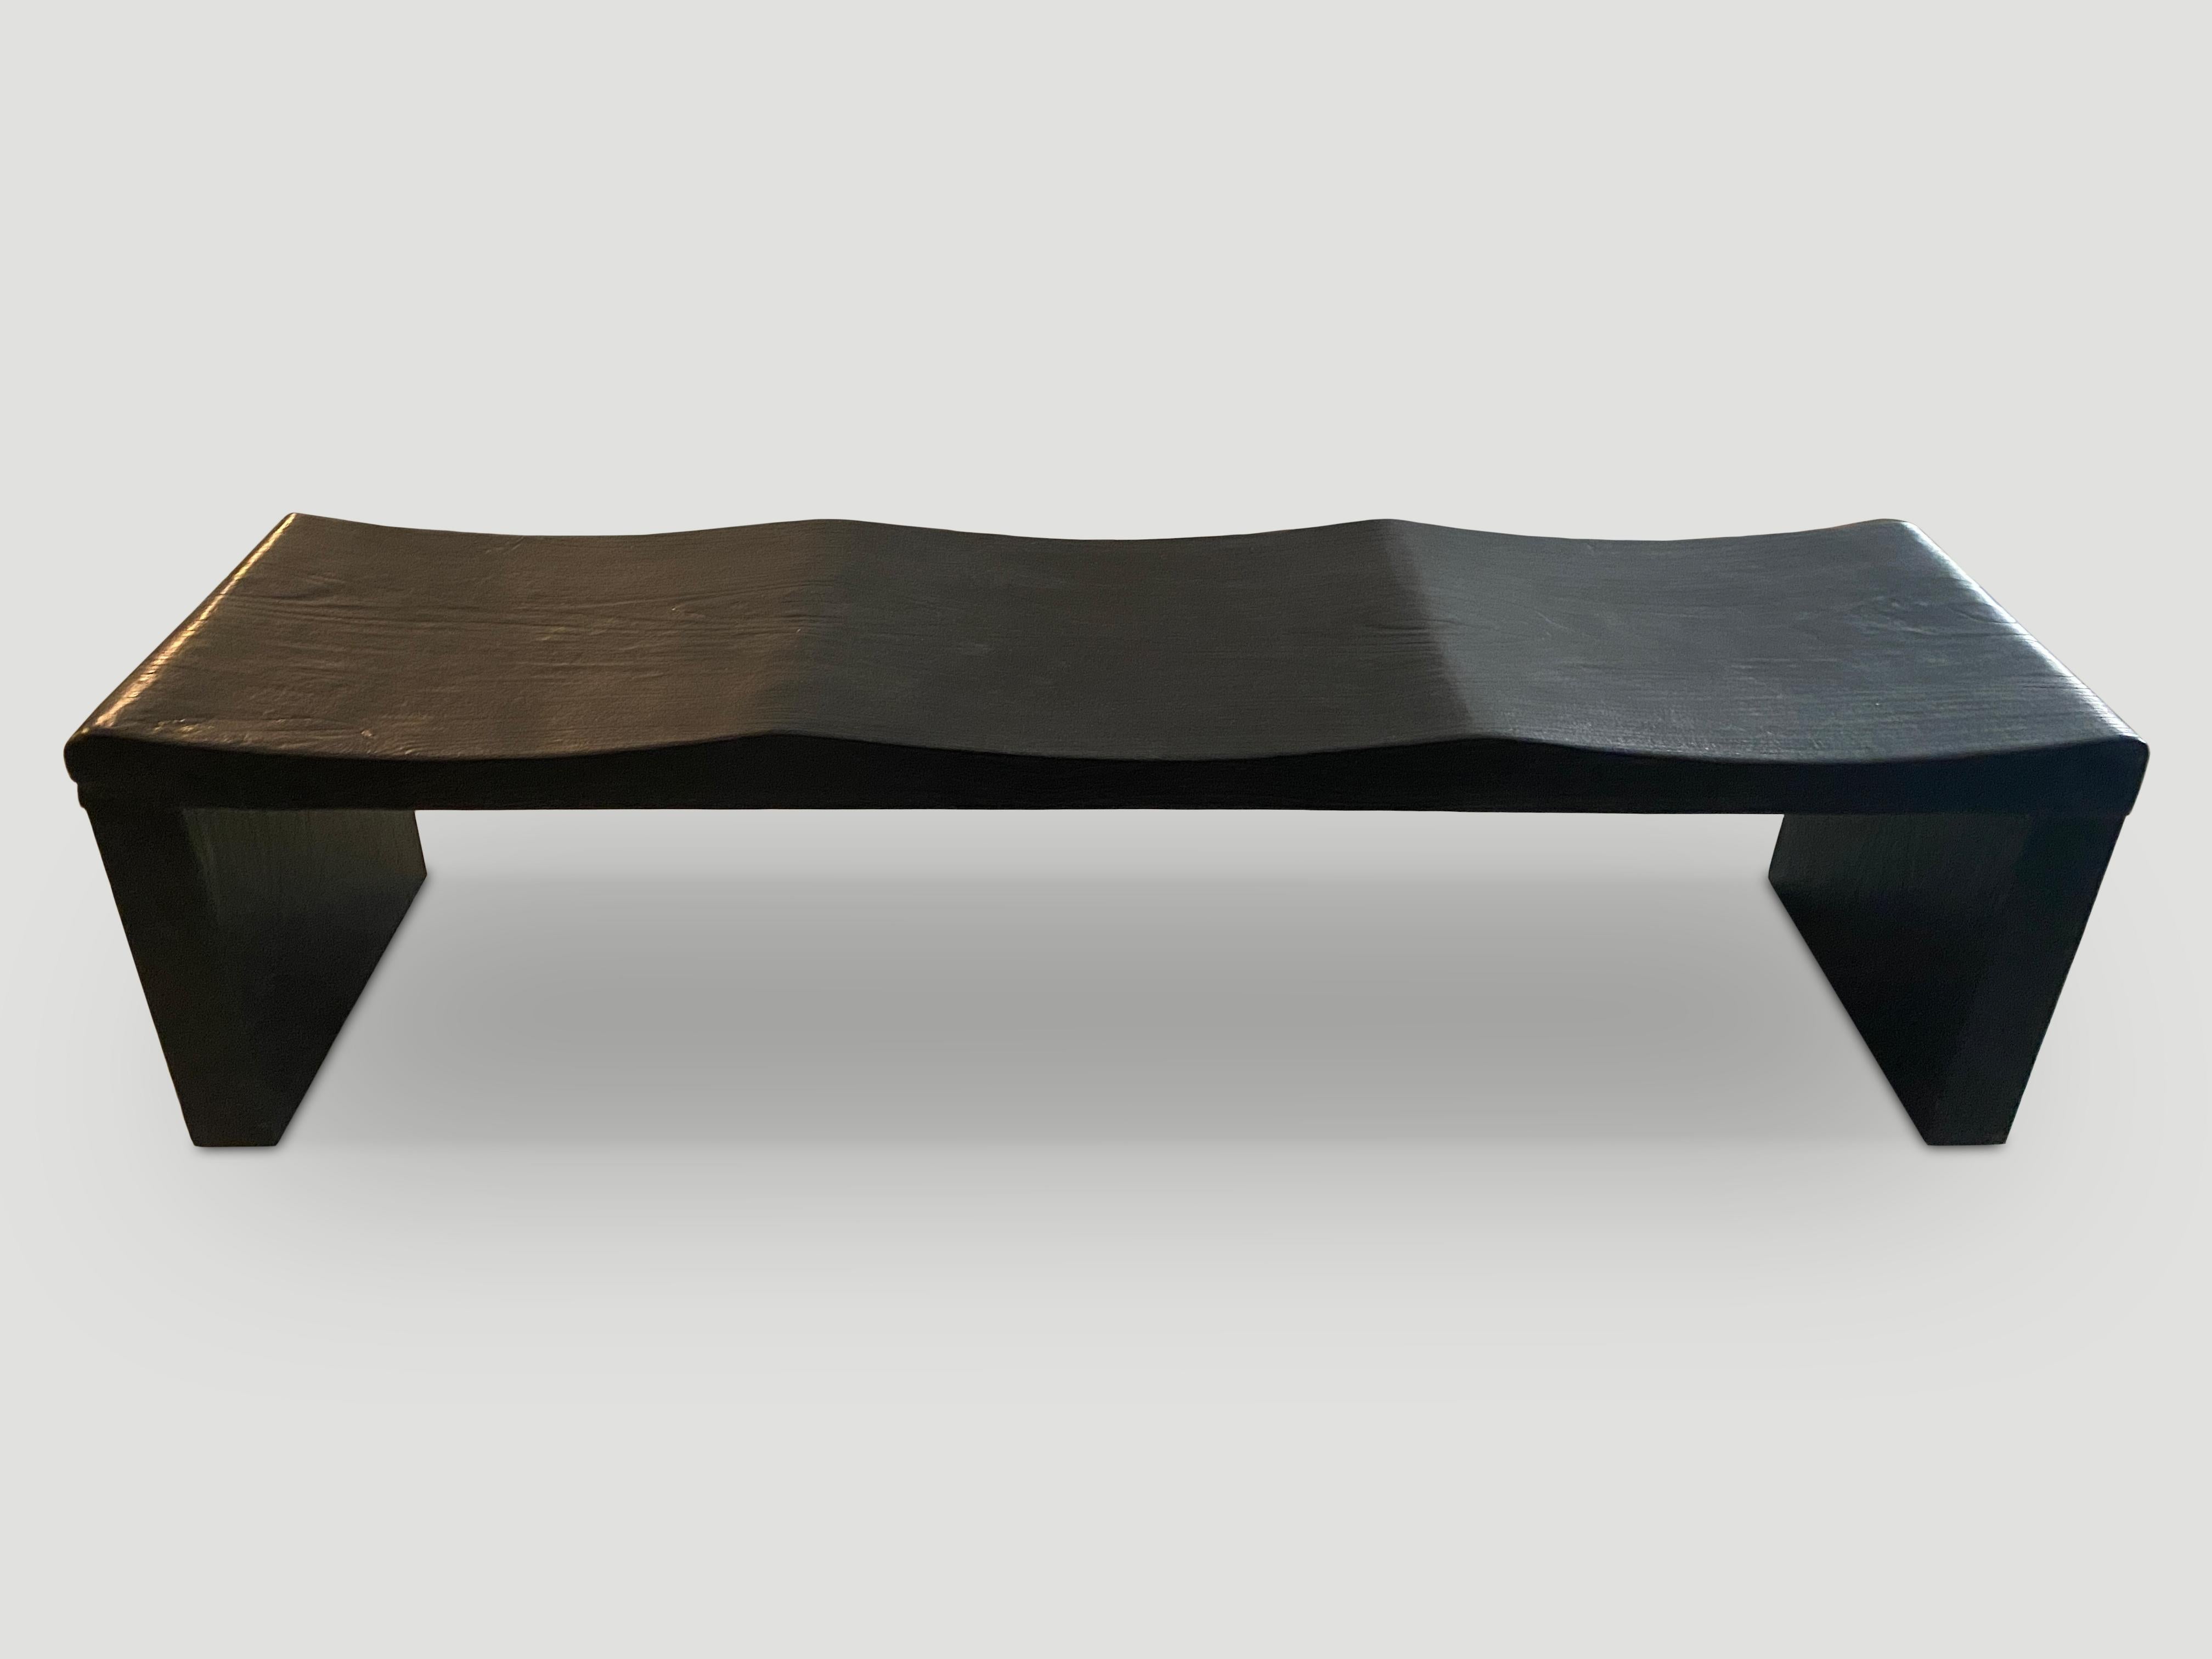 Andrianna Shamaris Charred Teak Wood Wave Bench In Excellent Condition For Sale In New York, NY